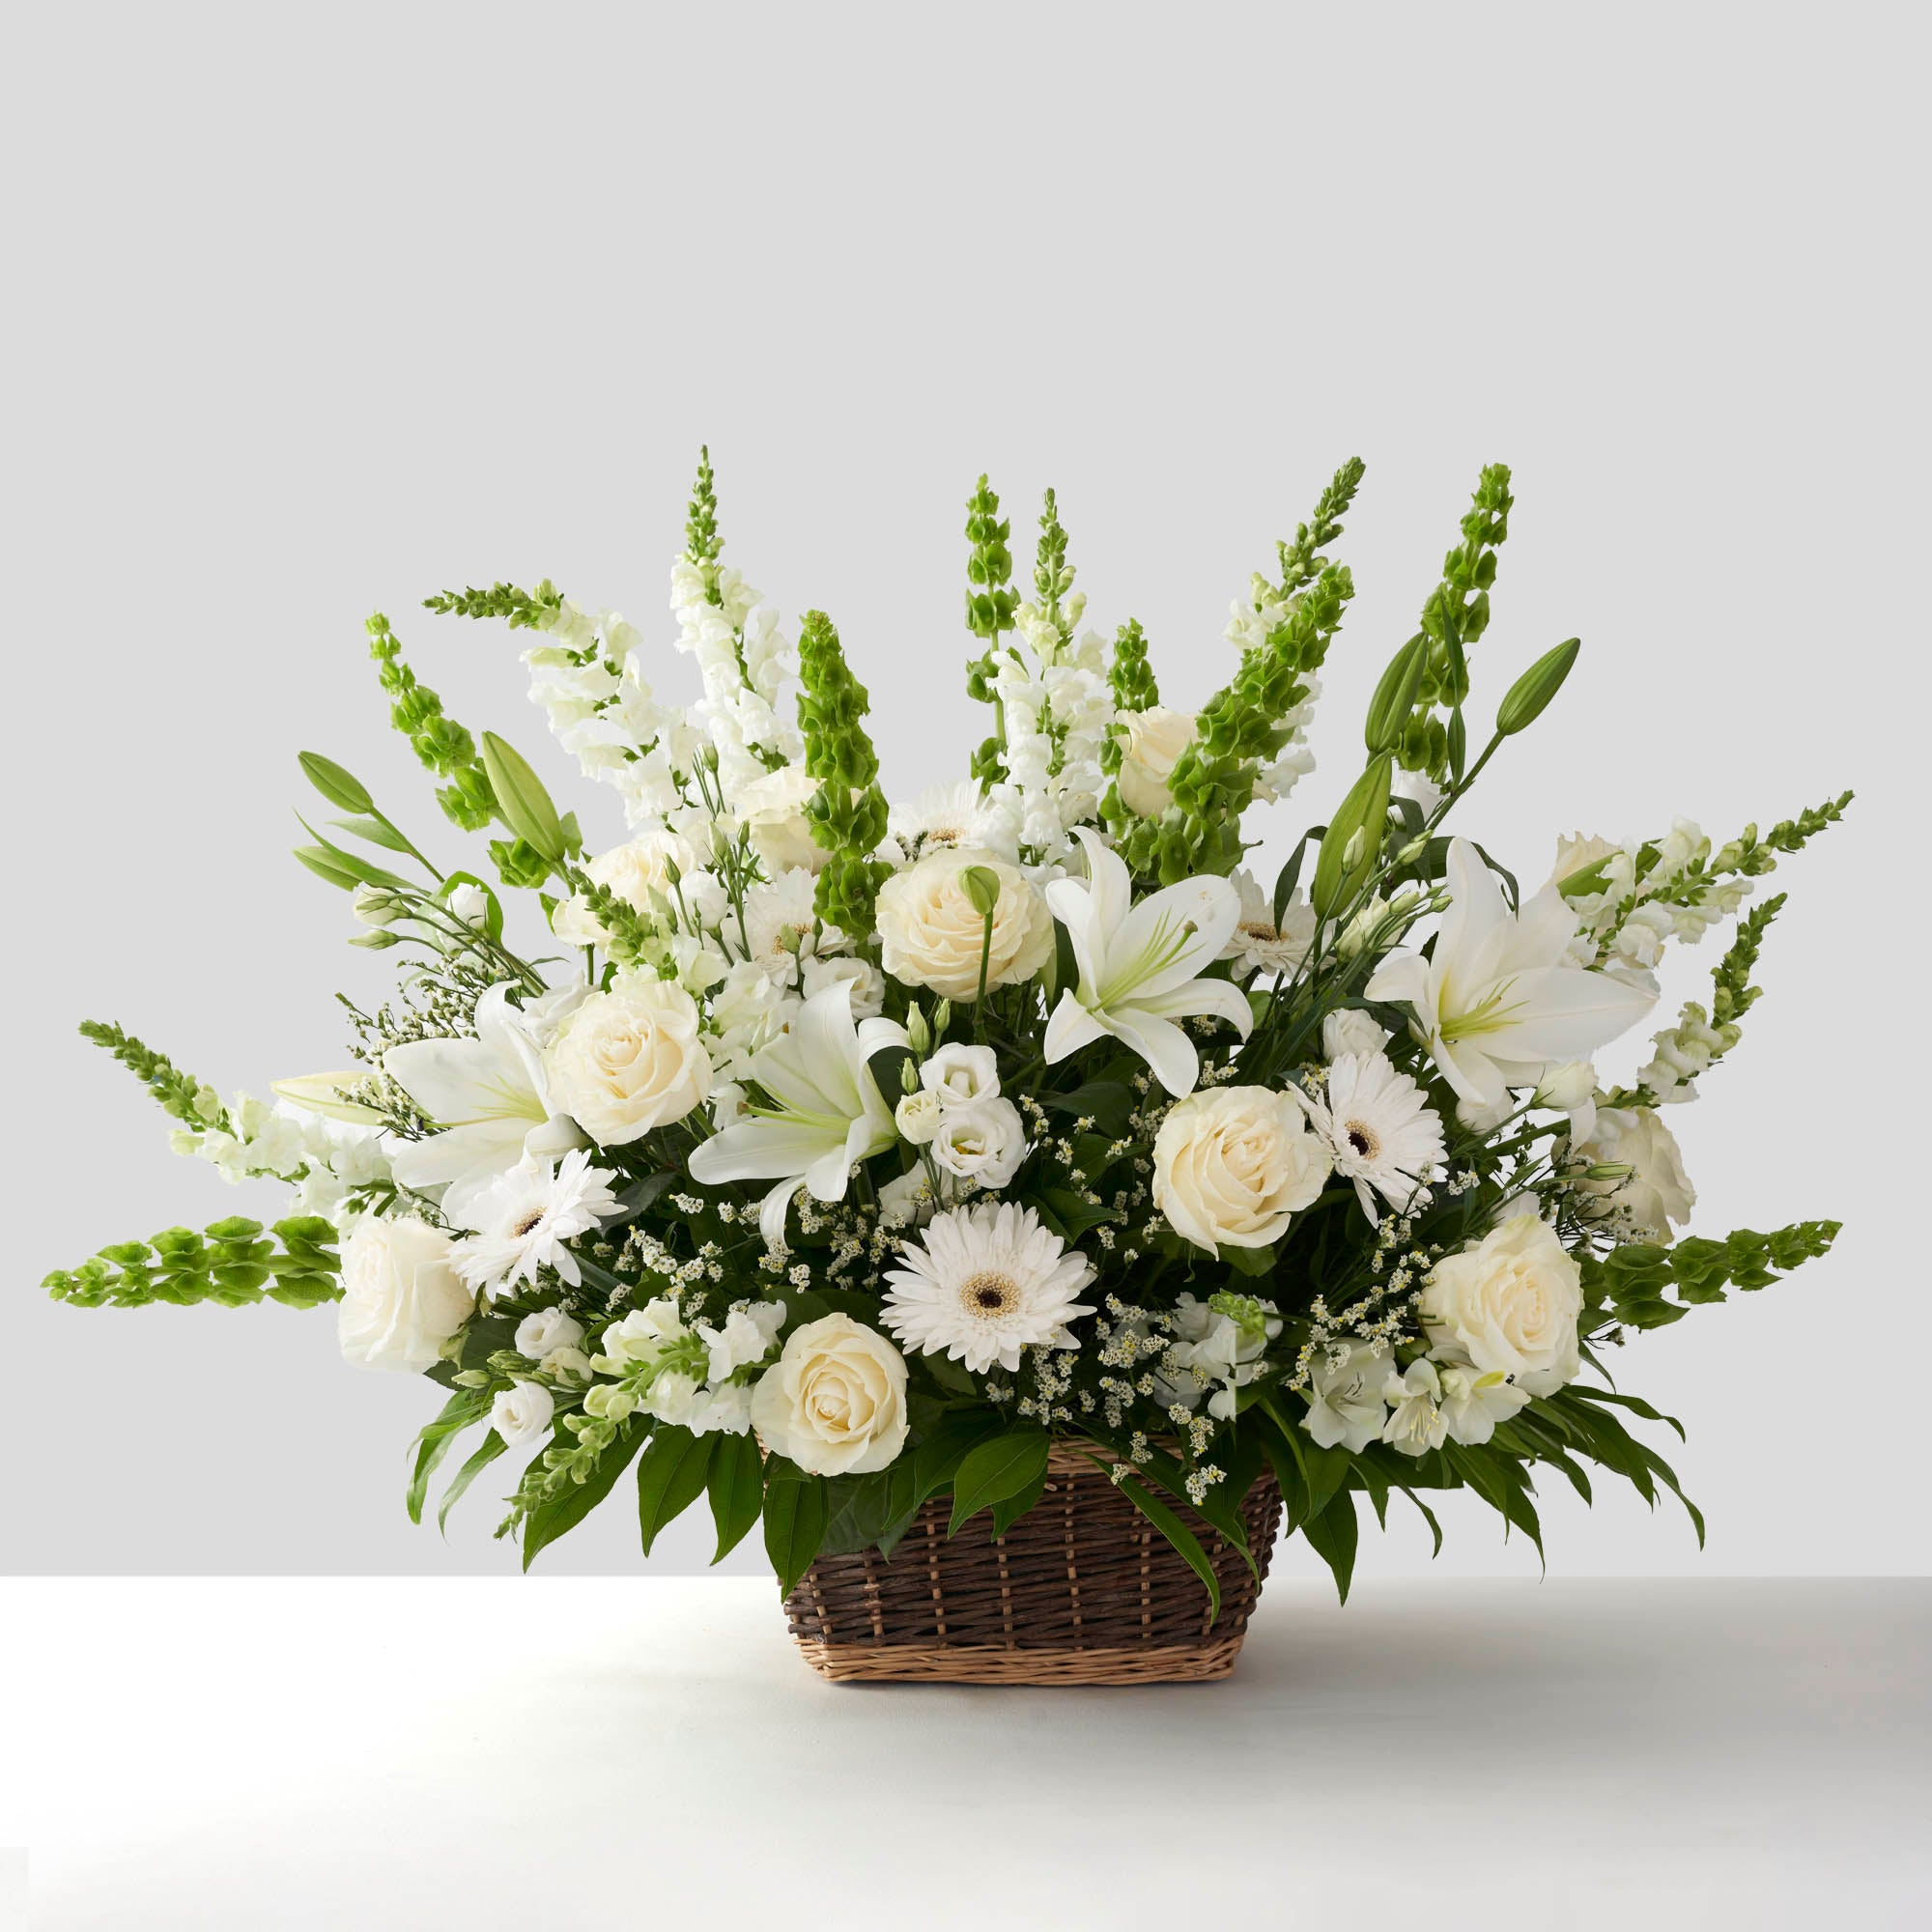 Large arrangement of all white flowers in natural basket